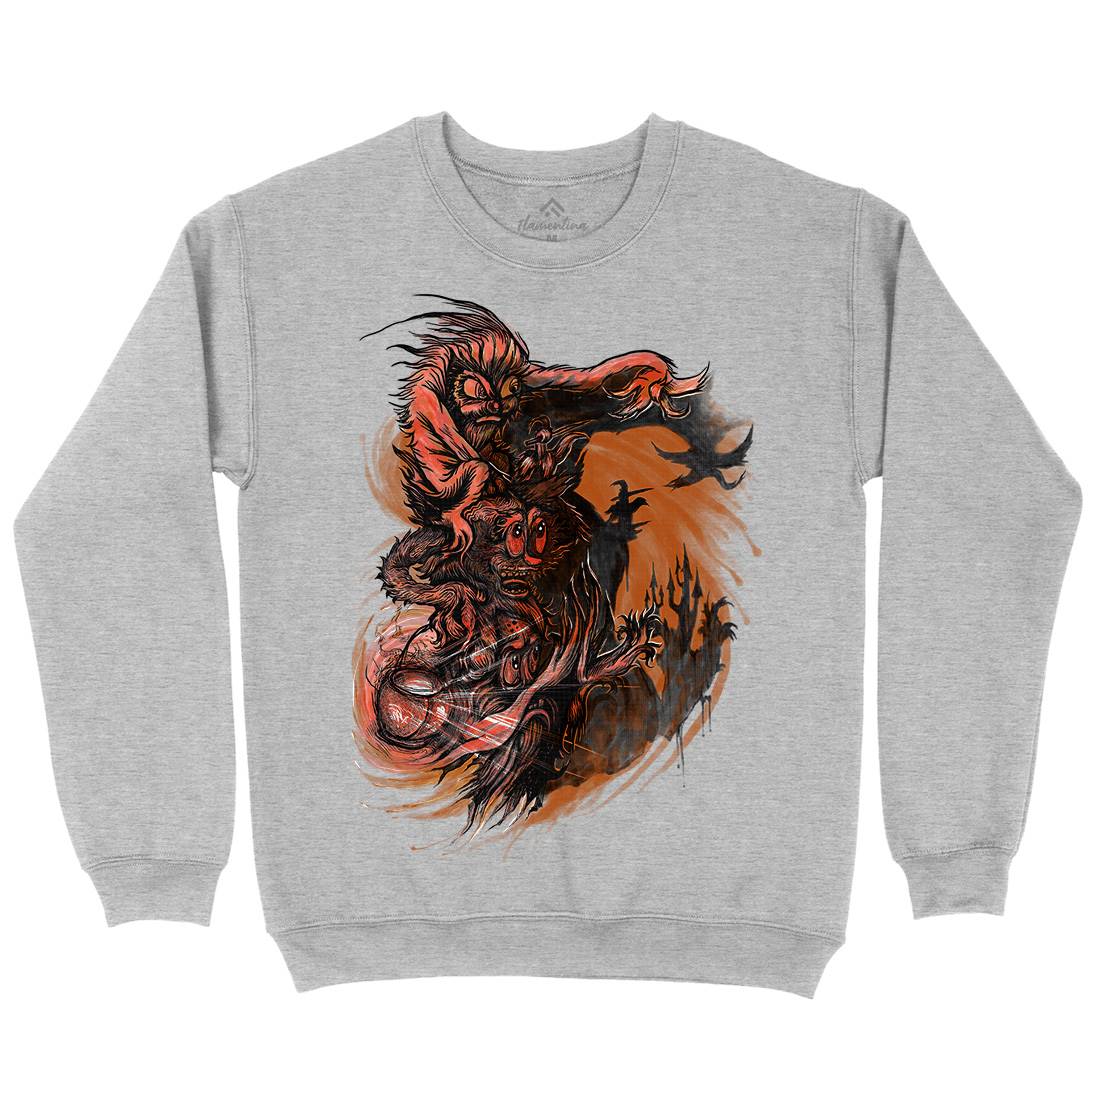 Playing With Shadows Kids Crew Neck Sweatshirt Horror D077